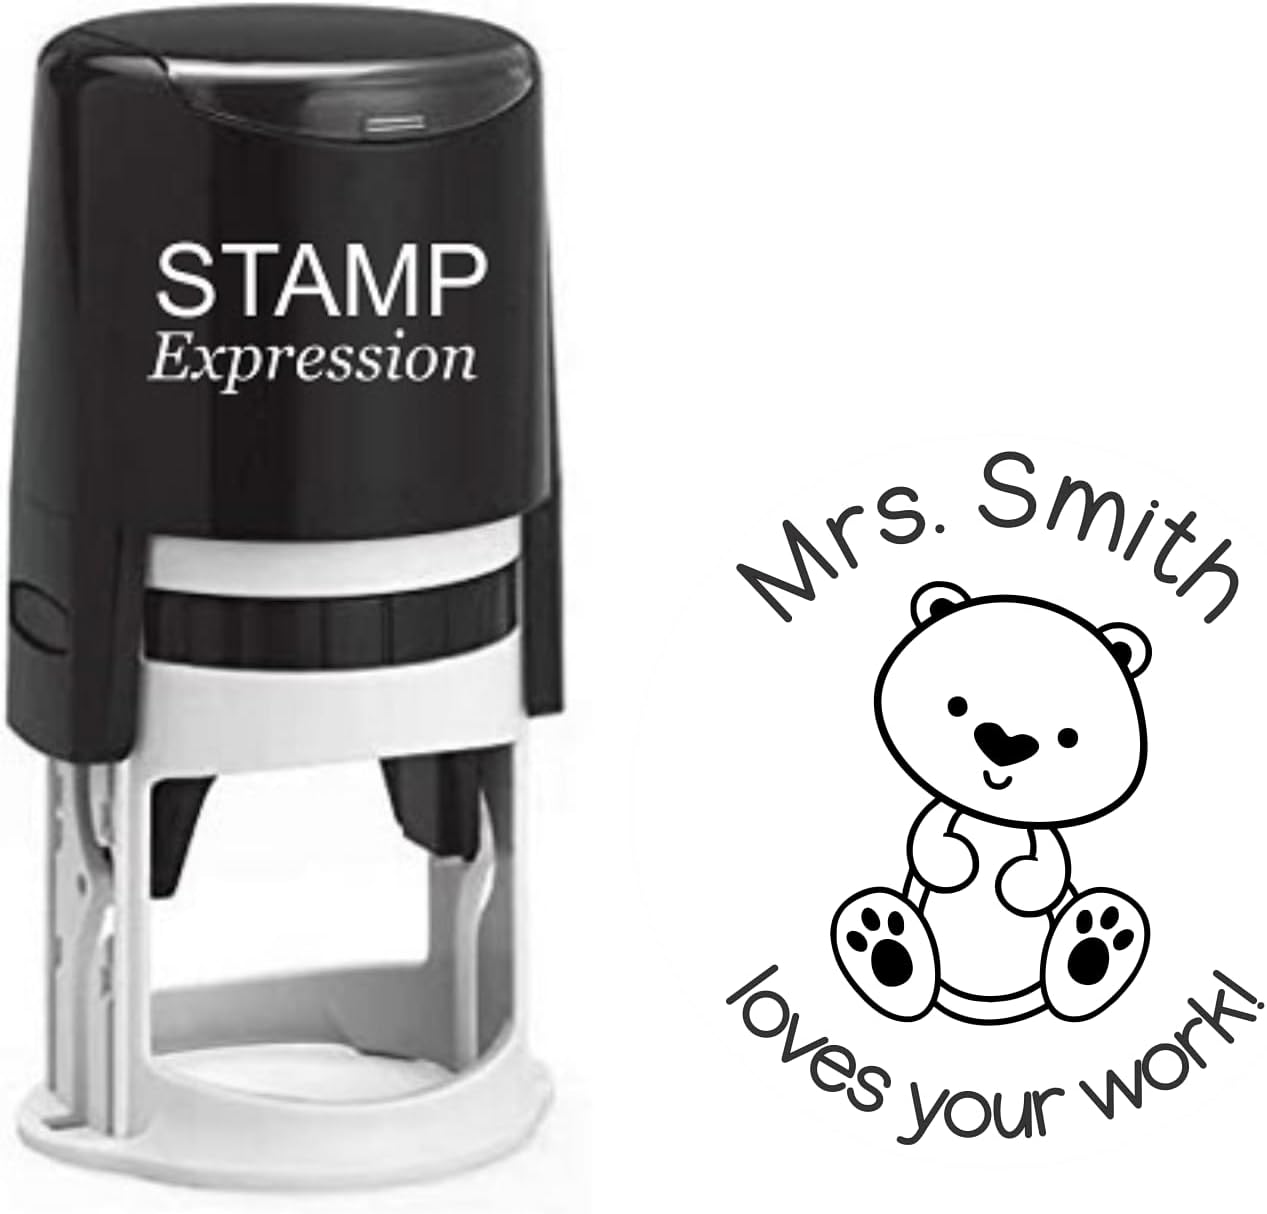 Loves Your Work Teddy Bear Teacher Custom Stamp - Self Inking. Personalized Rubber Stamp with Lines of Text (SH-76207)